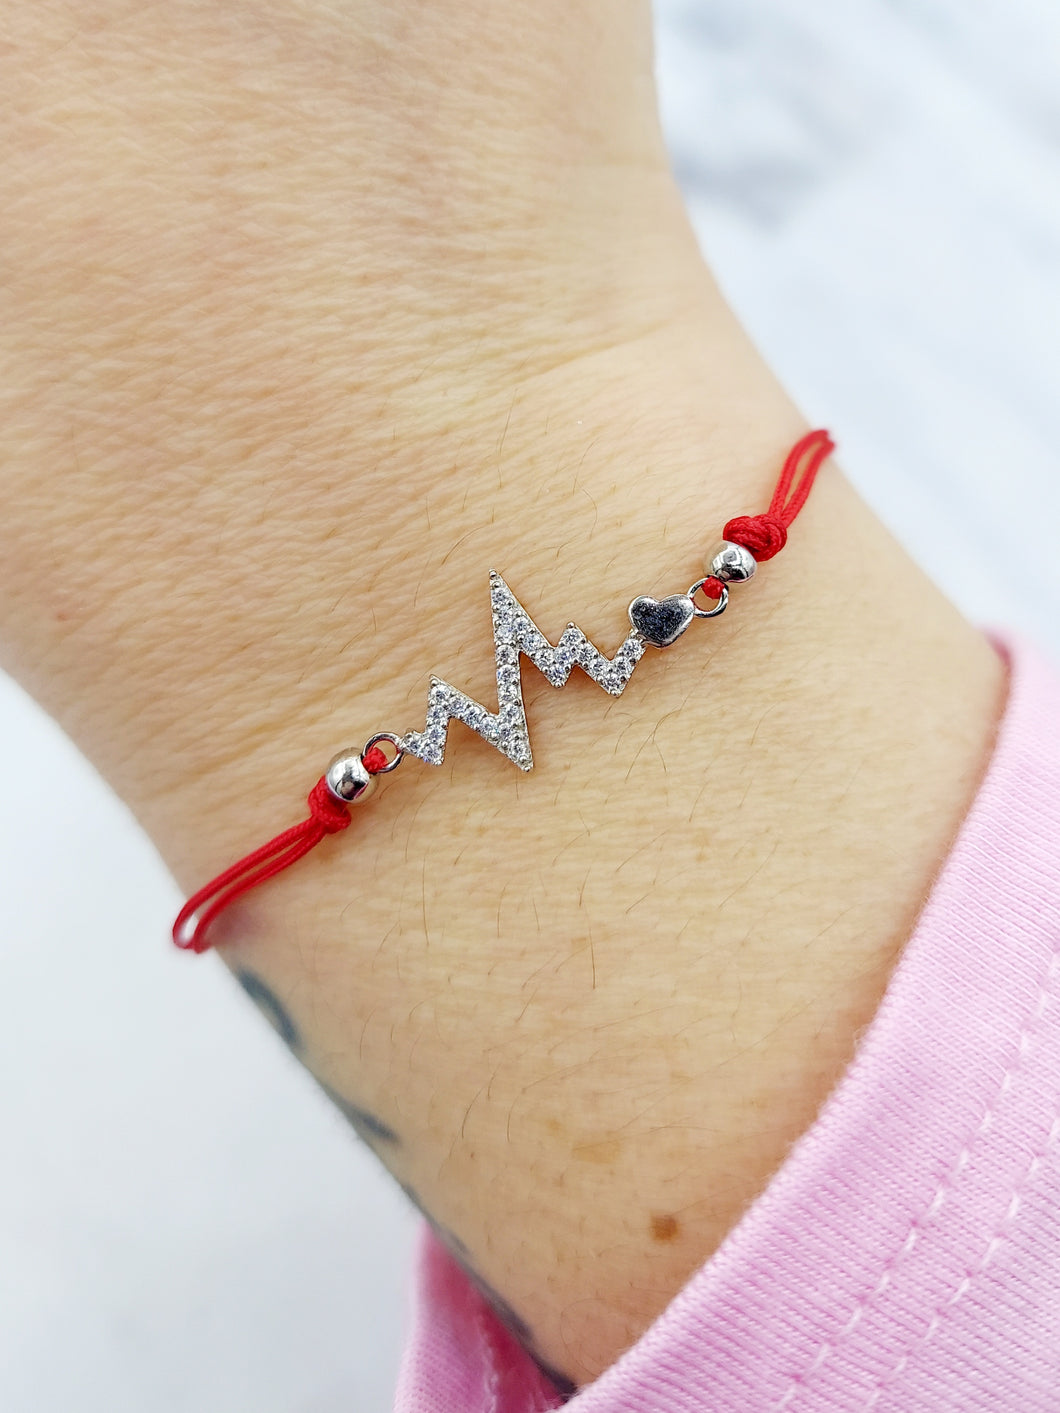 Heartbeat Jewelry Collection - Actual Heartbeat Bracelet - Personalize -  Nadin Art Design - Personalized Jewelry